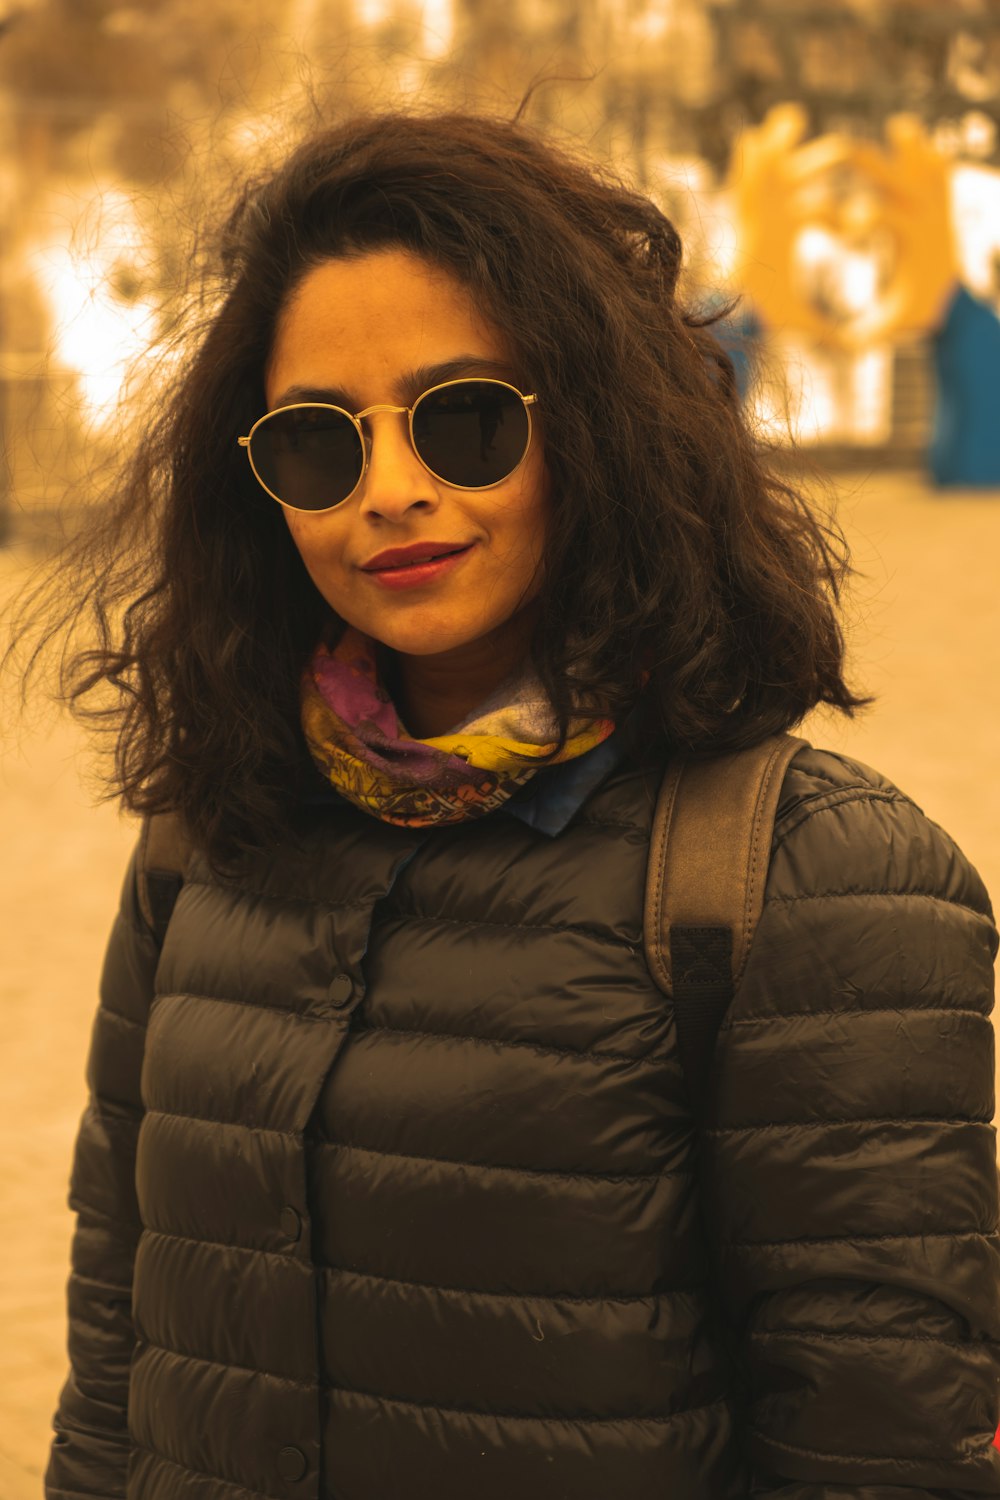 a woman wearing sunglasses and a jacket